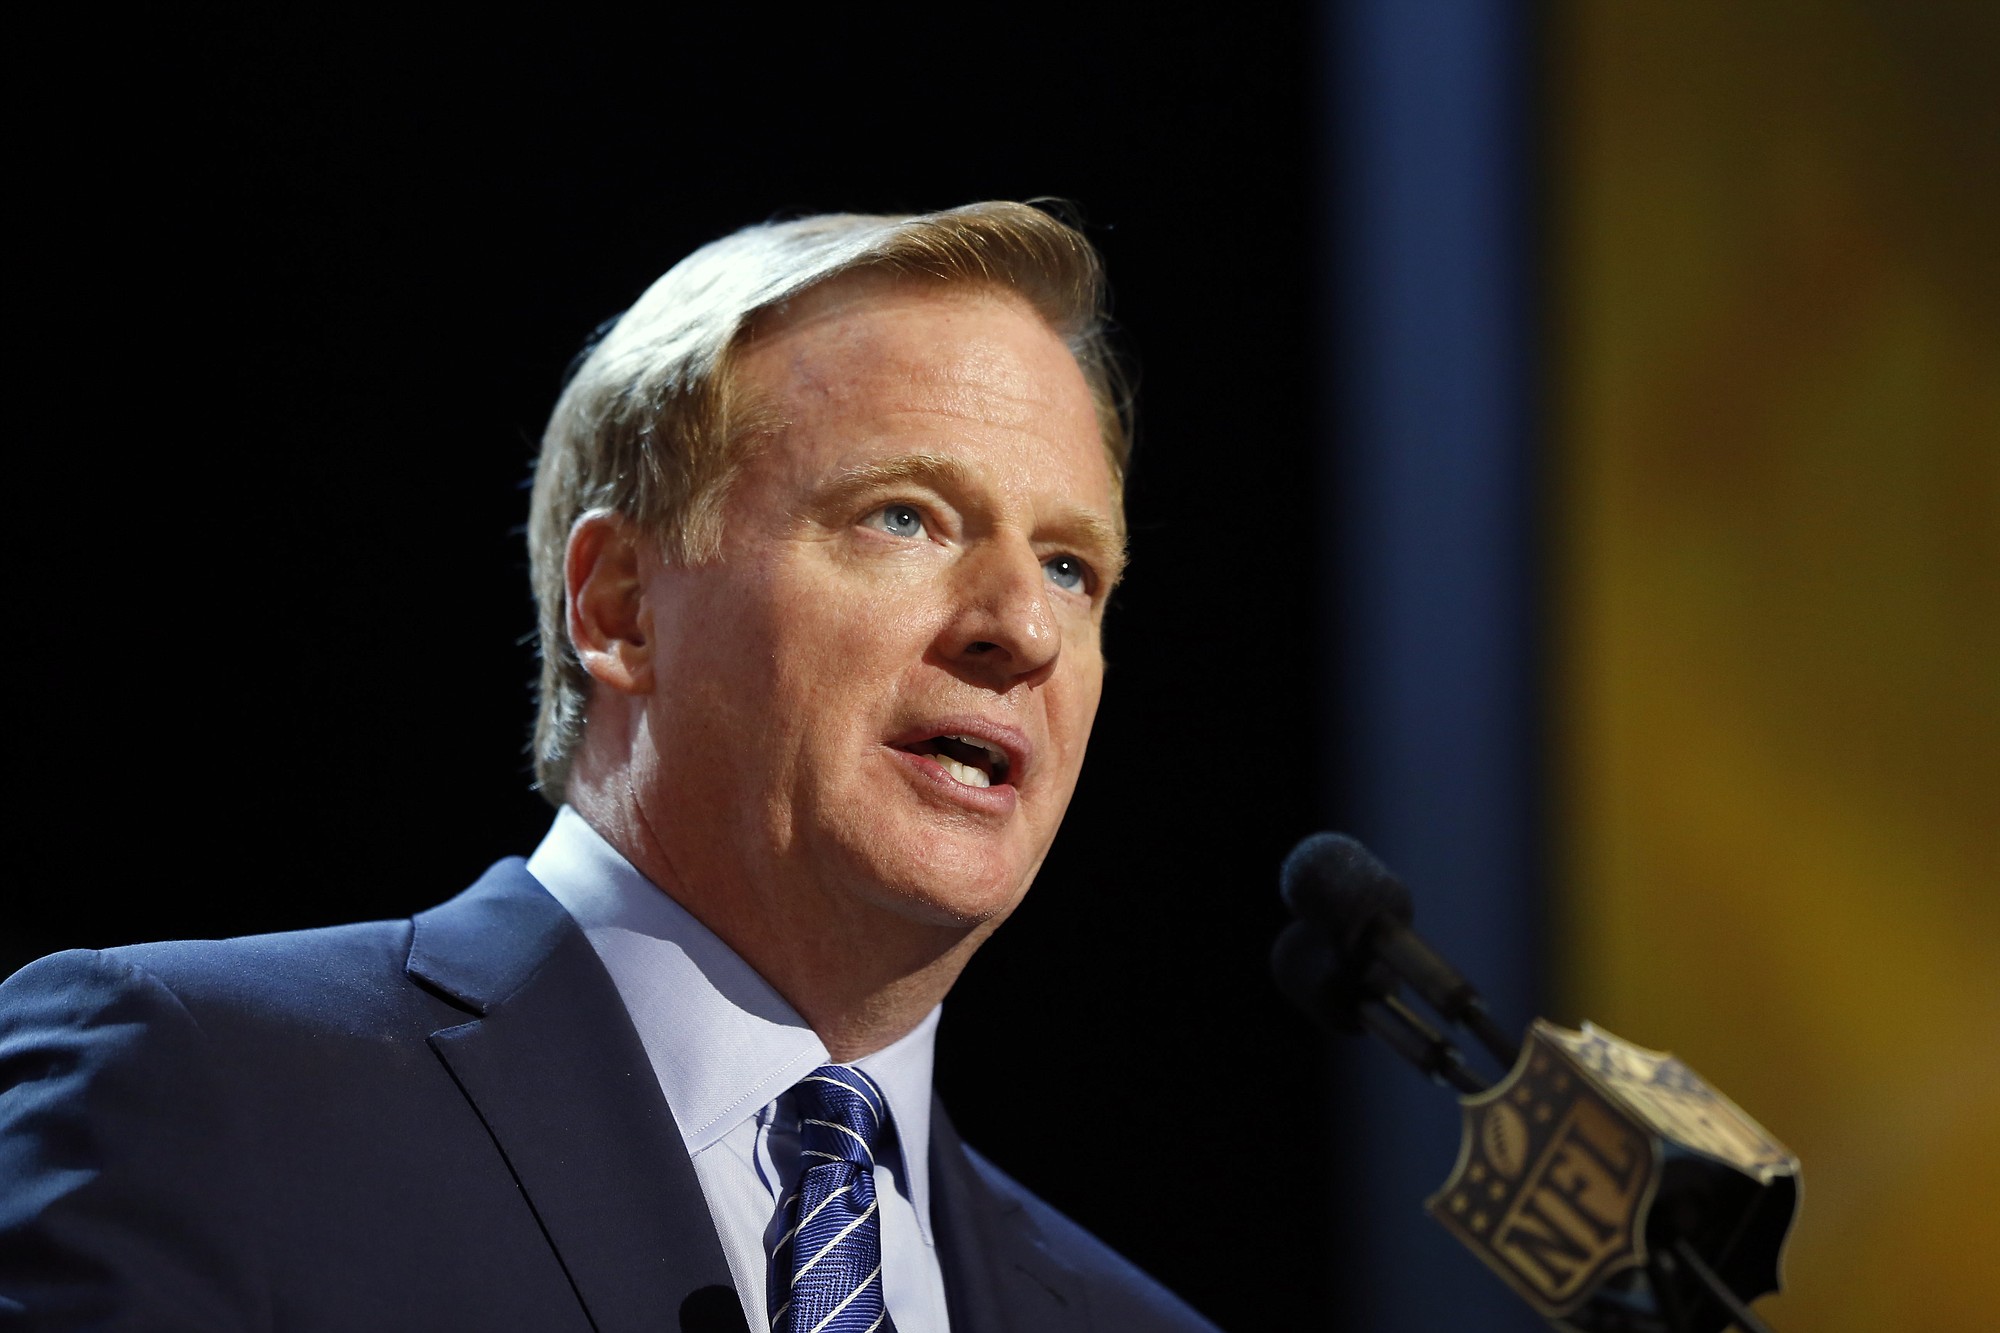 FILE - In this Thursday, April 30, 2015 file photo, NFL commissioner Roger Goodell speaks during the first round of the 2015 NFL Football Draft in Chicago.